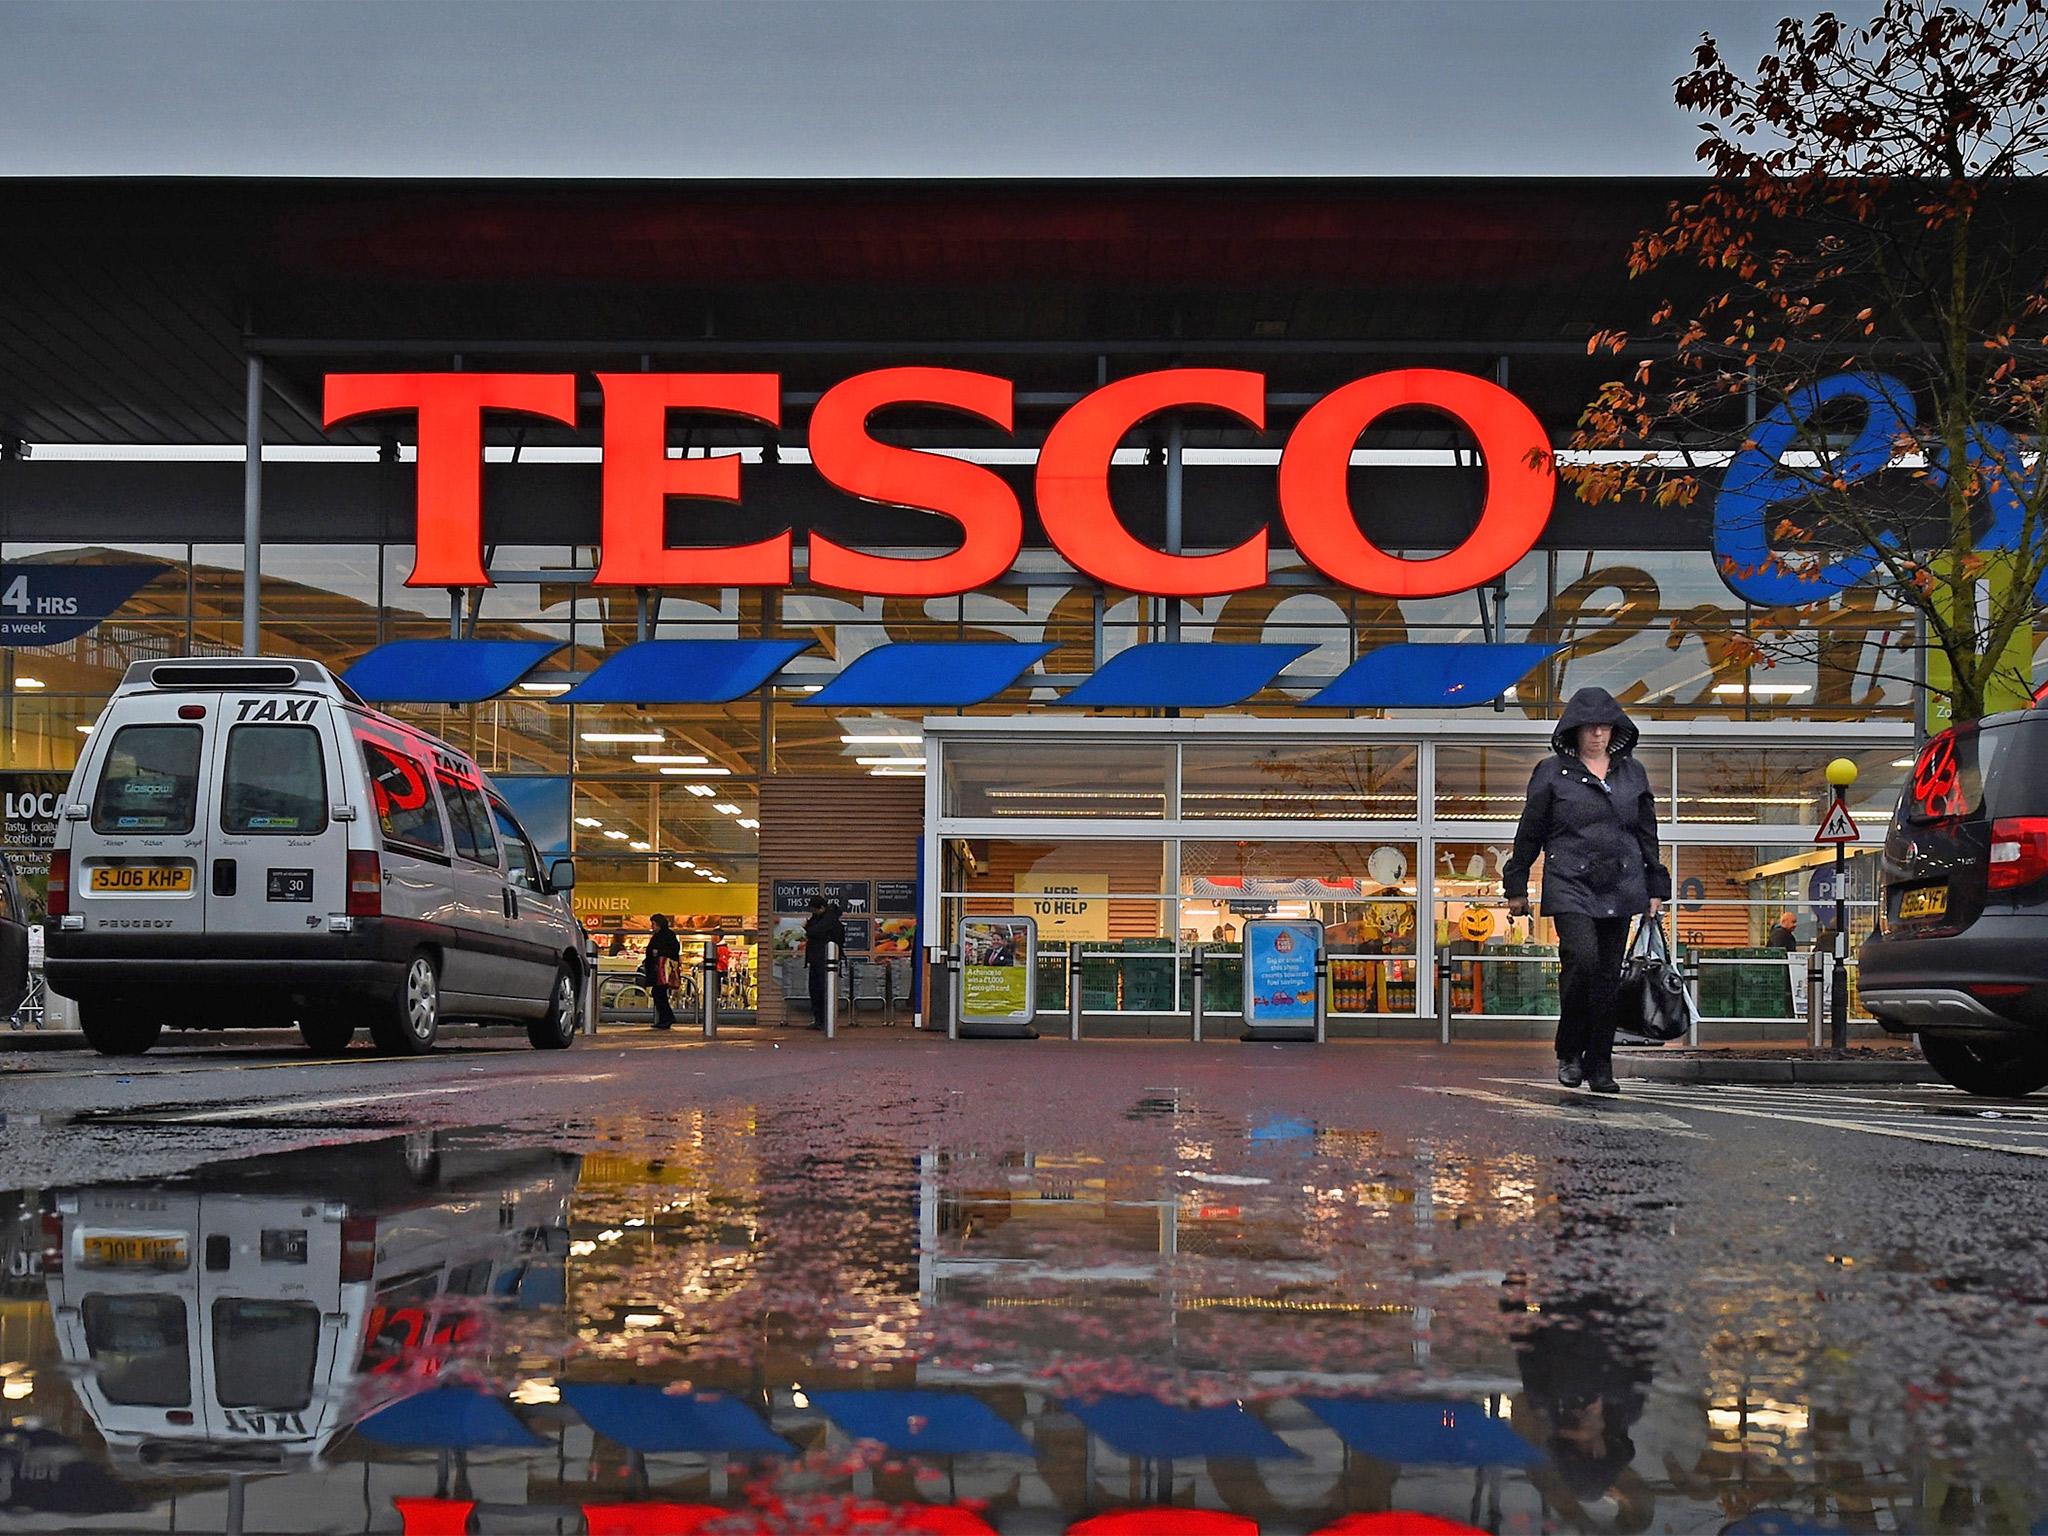 'We will not publish it again,' the Tesco spokesperson said